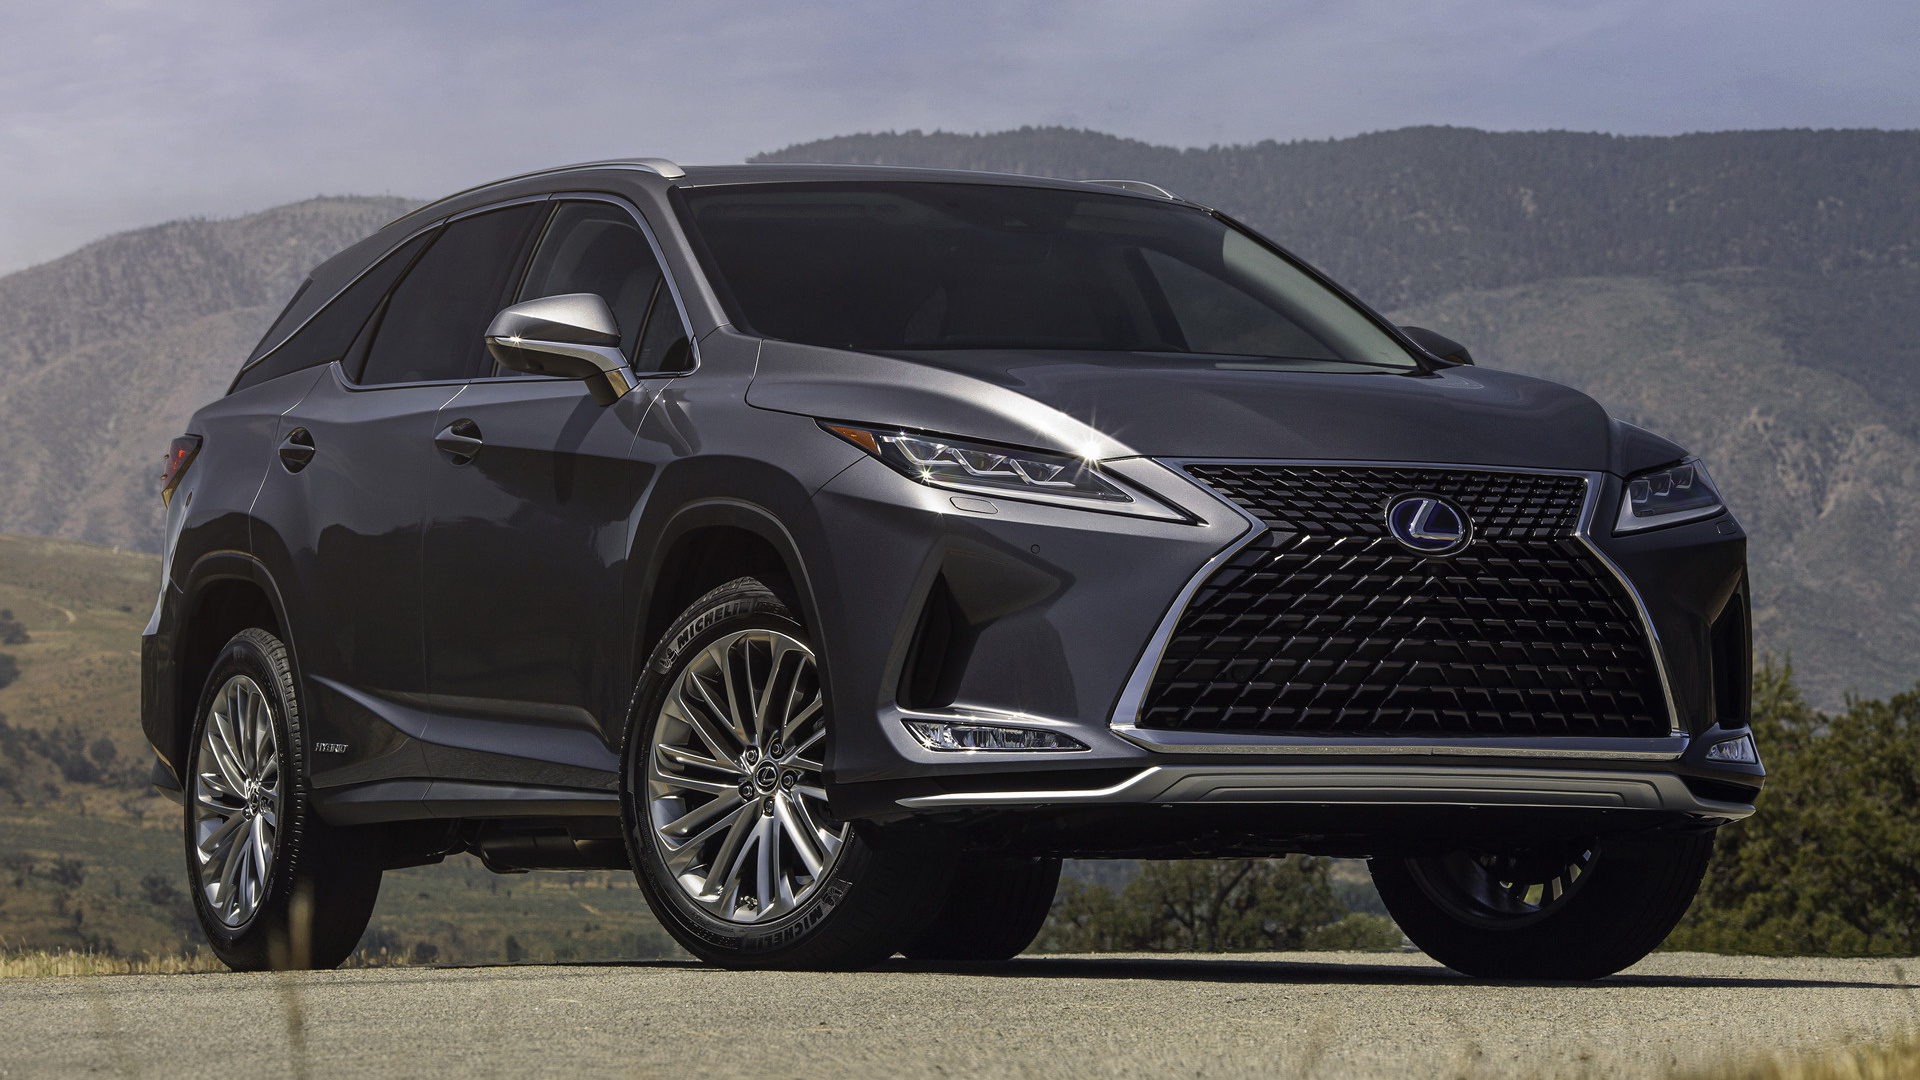 2020 Lexus RX Hybrid [LWB] (US) Wallpapers and HD Images